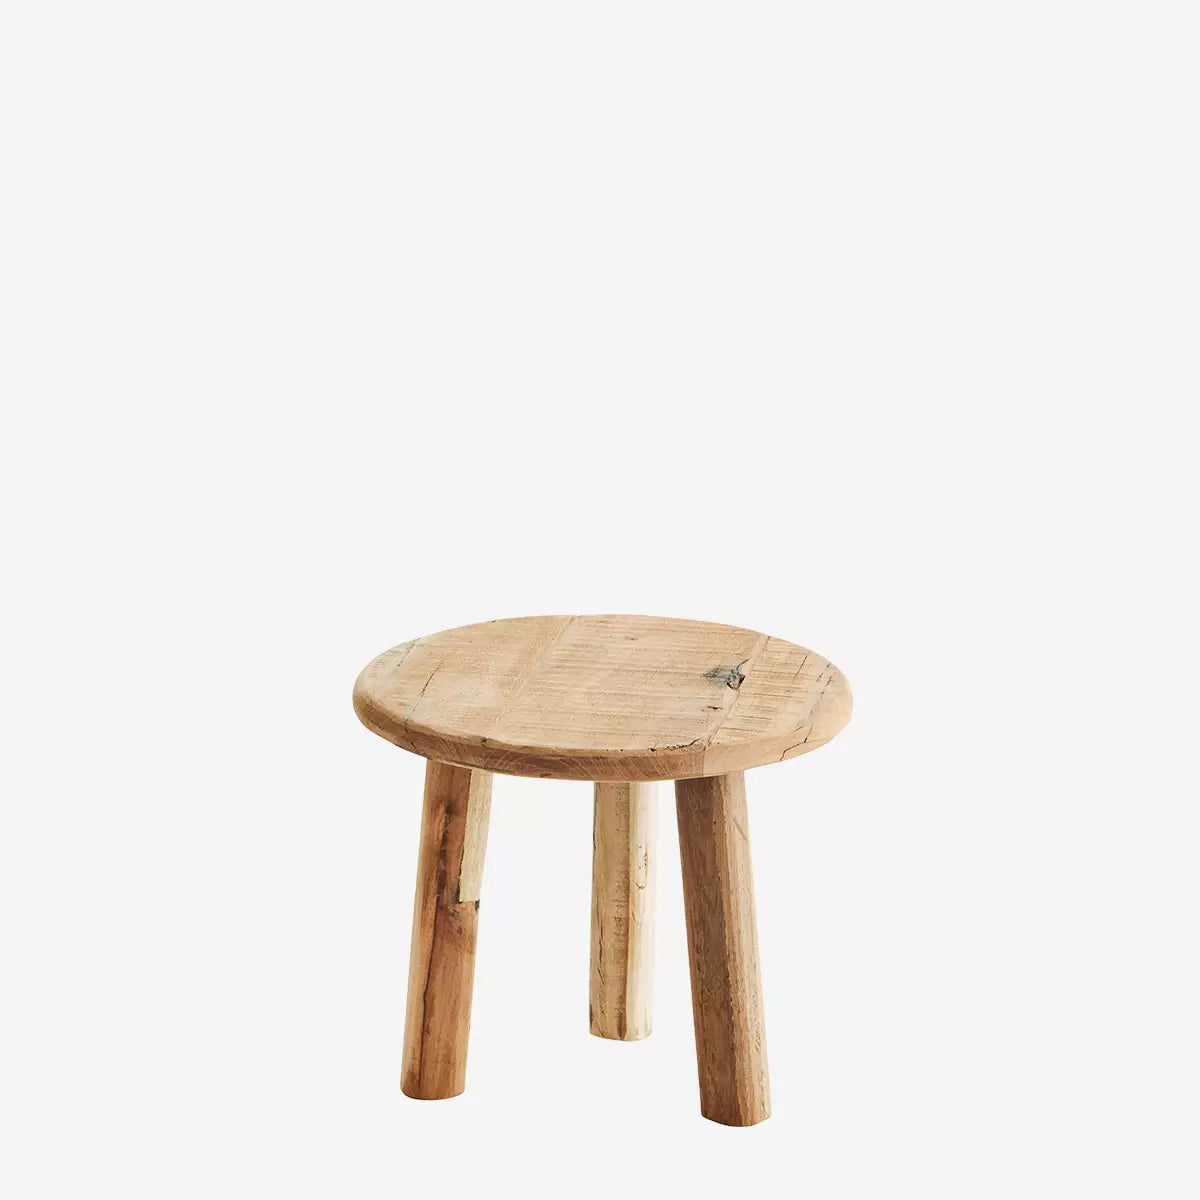 Recycled Wooden Milking Stool